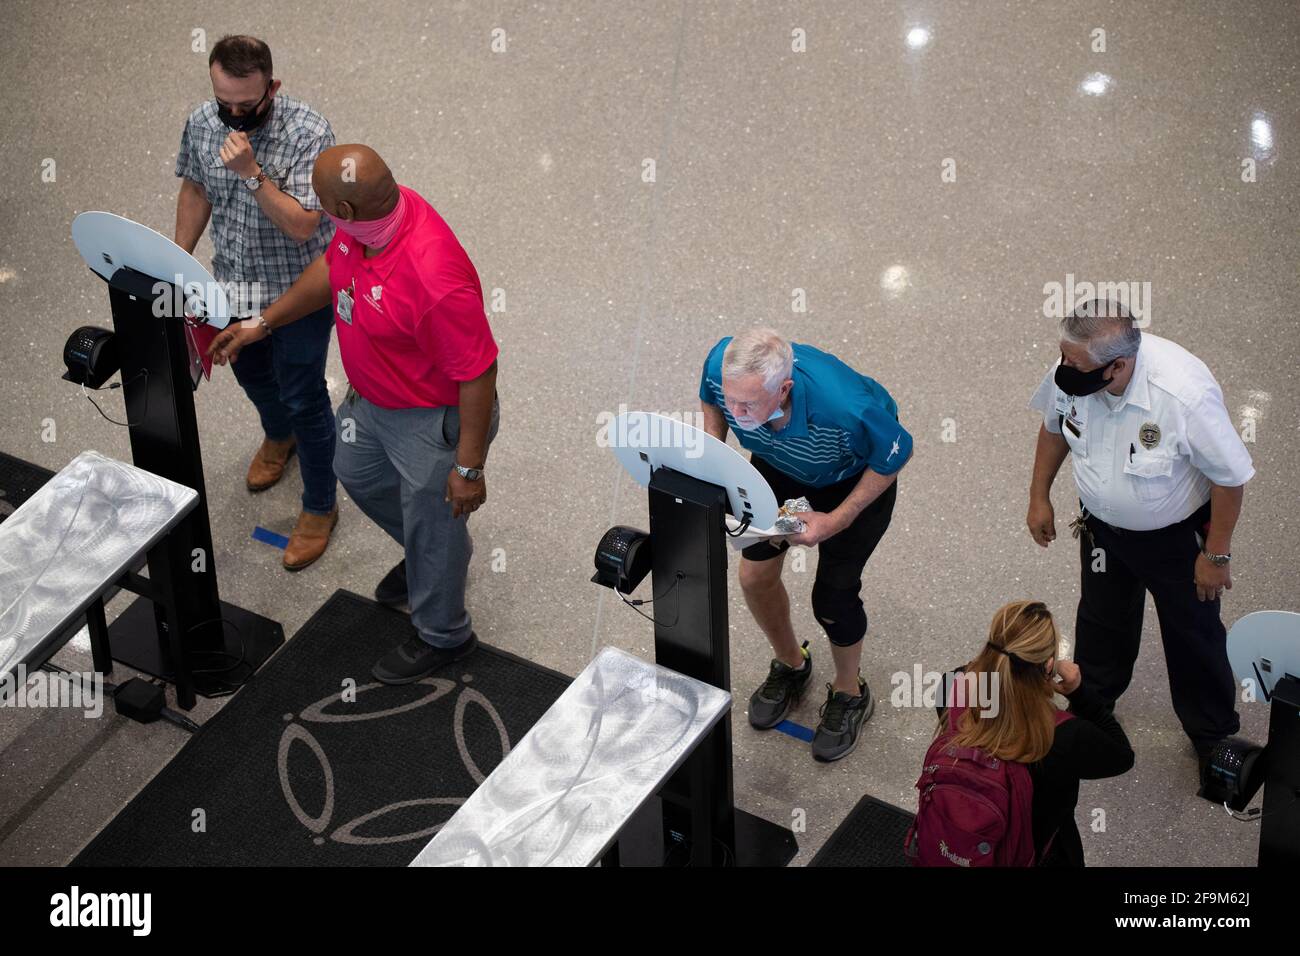 San Antonio, Texas, USA. 15th Apr, 2021. Convention attendees pause for a touchless temperature check at the entrance to the San Antonio Convention Center on April 14, 2021. San Antonio hosted its second convention in almost a year in April as associations and corporations cut back on 2020 travel due to the coronavirus pandemic. Credit: Bob Daemmrich/ZUMA Wire/Alamy Live News Stock Photo